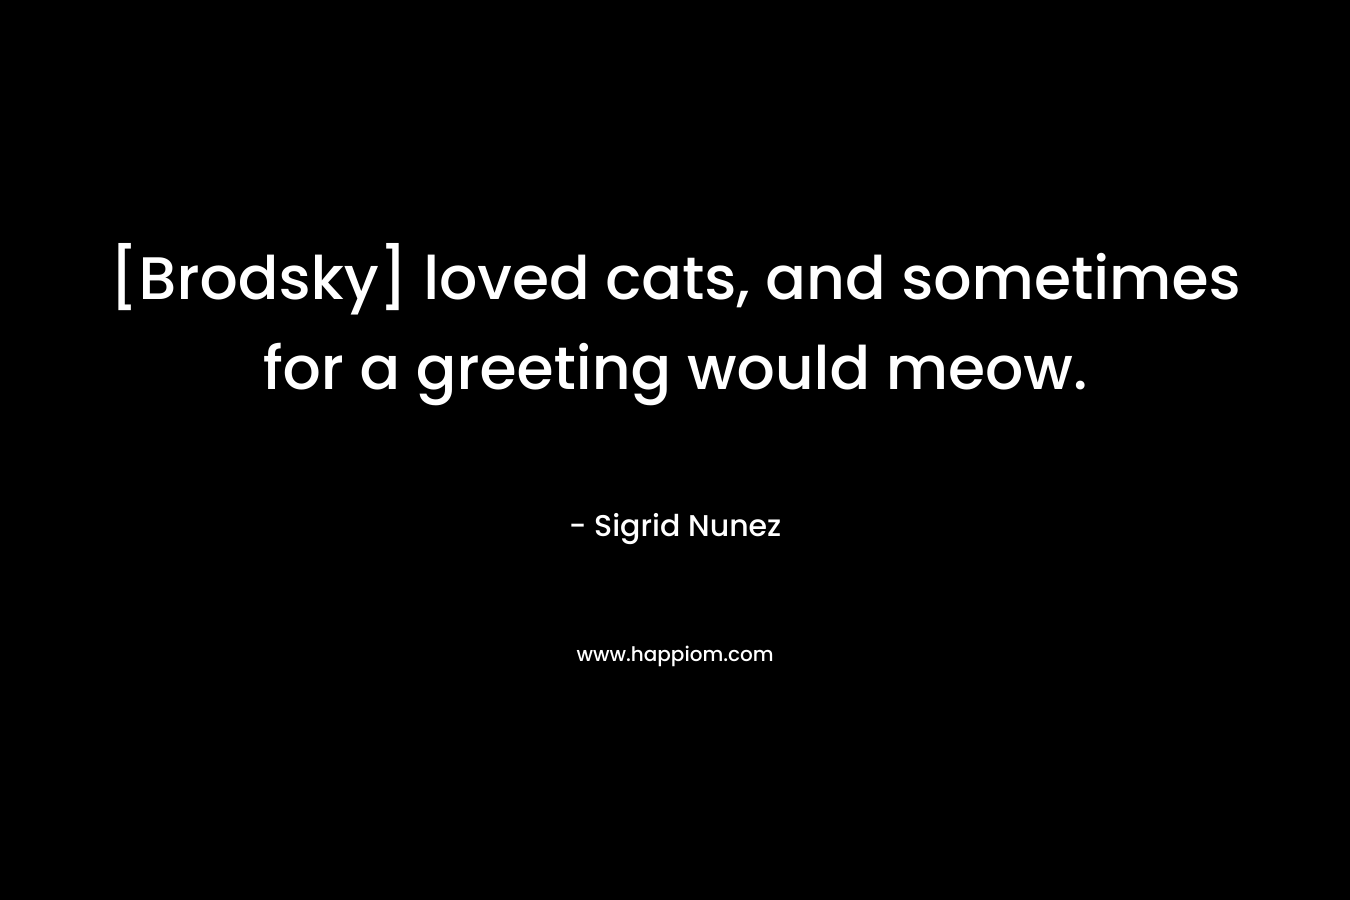 [Brodsky] loved cats, and sometimes for a greeting would meow. – Sigrid Nunez